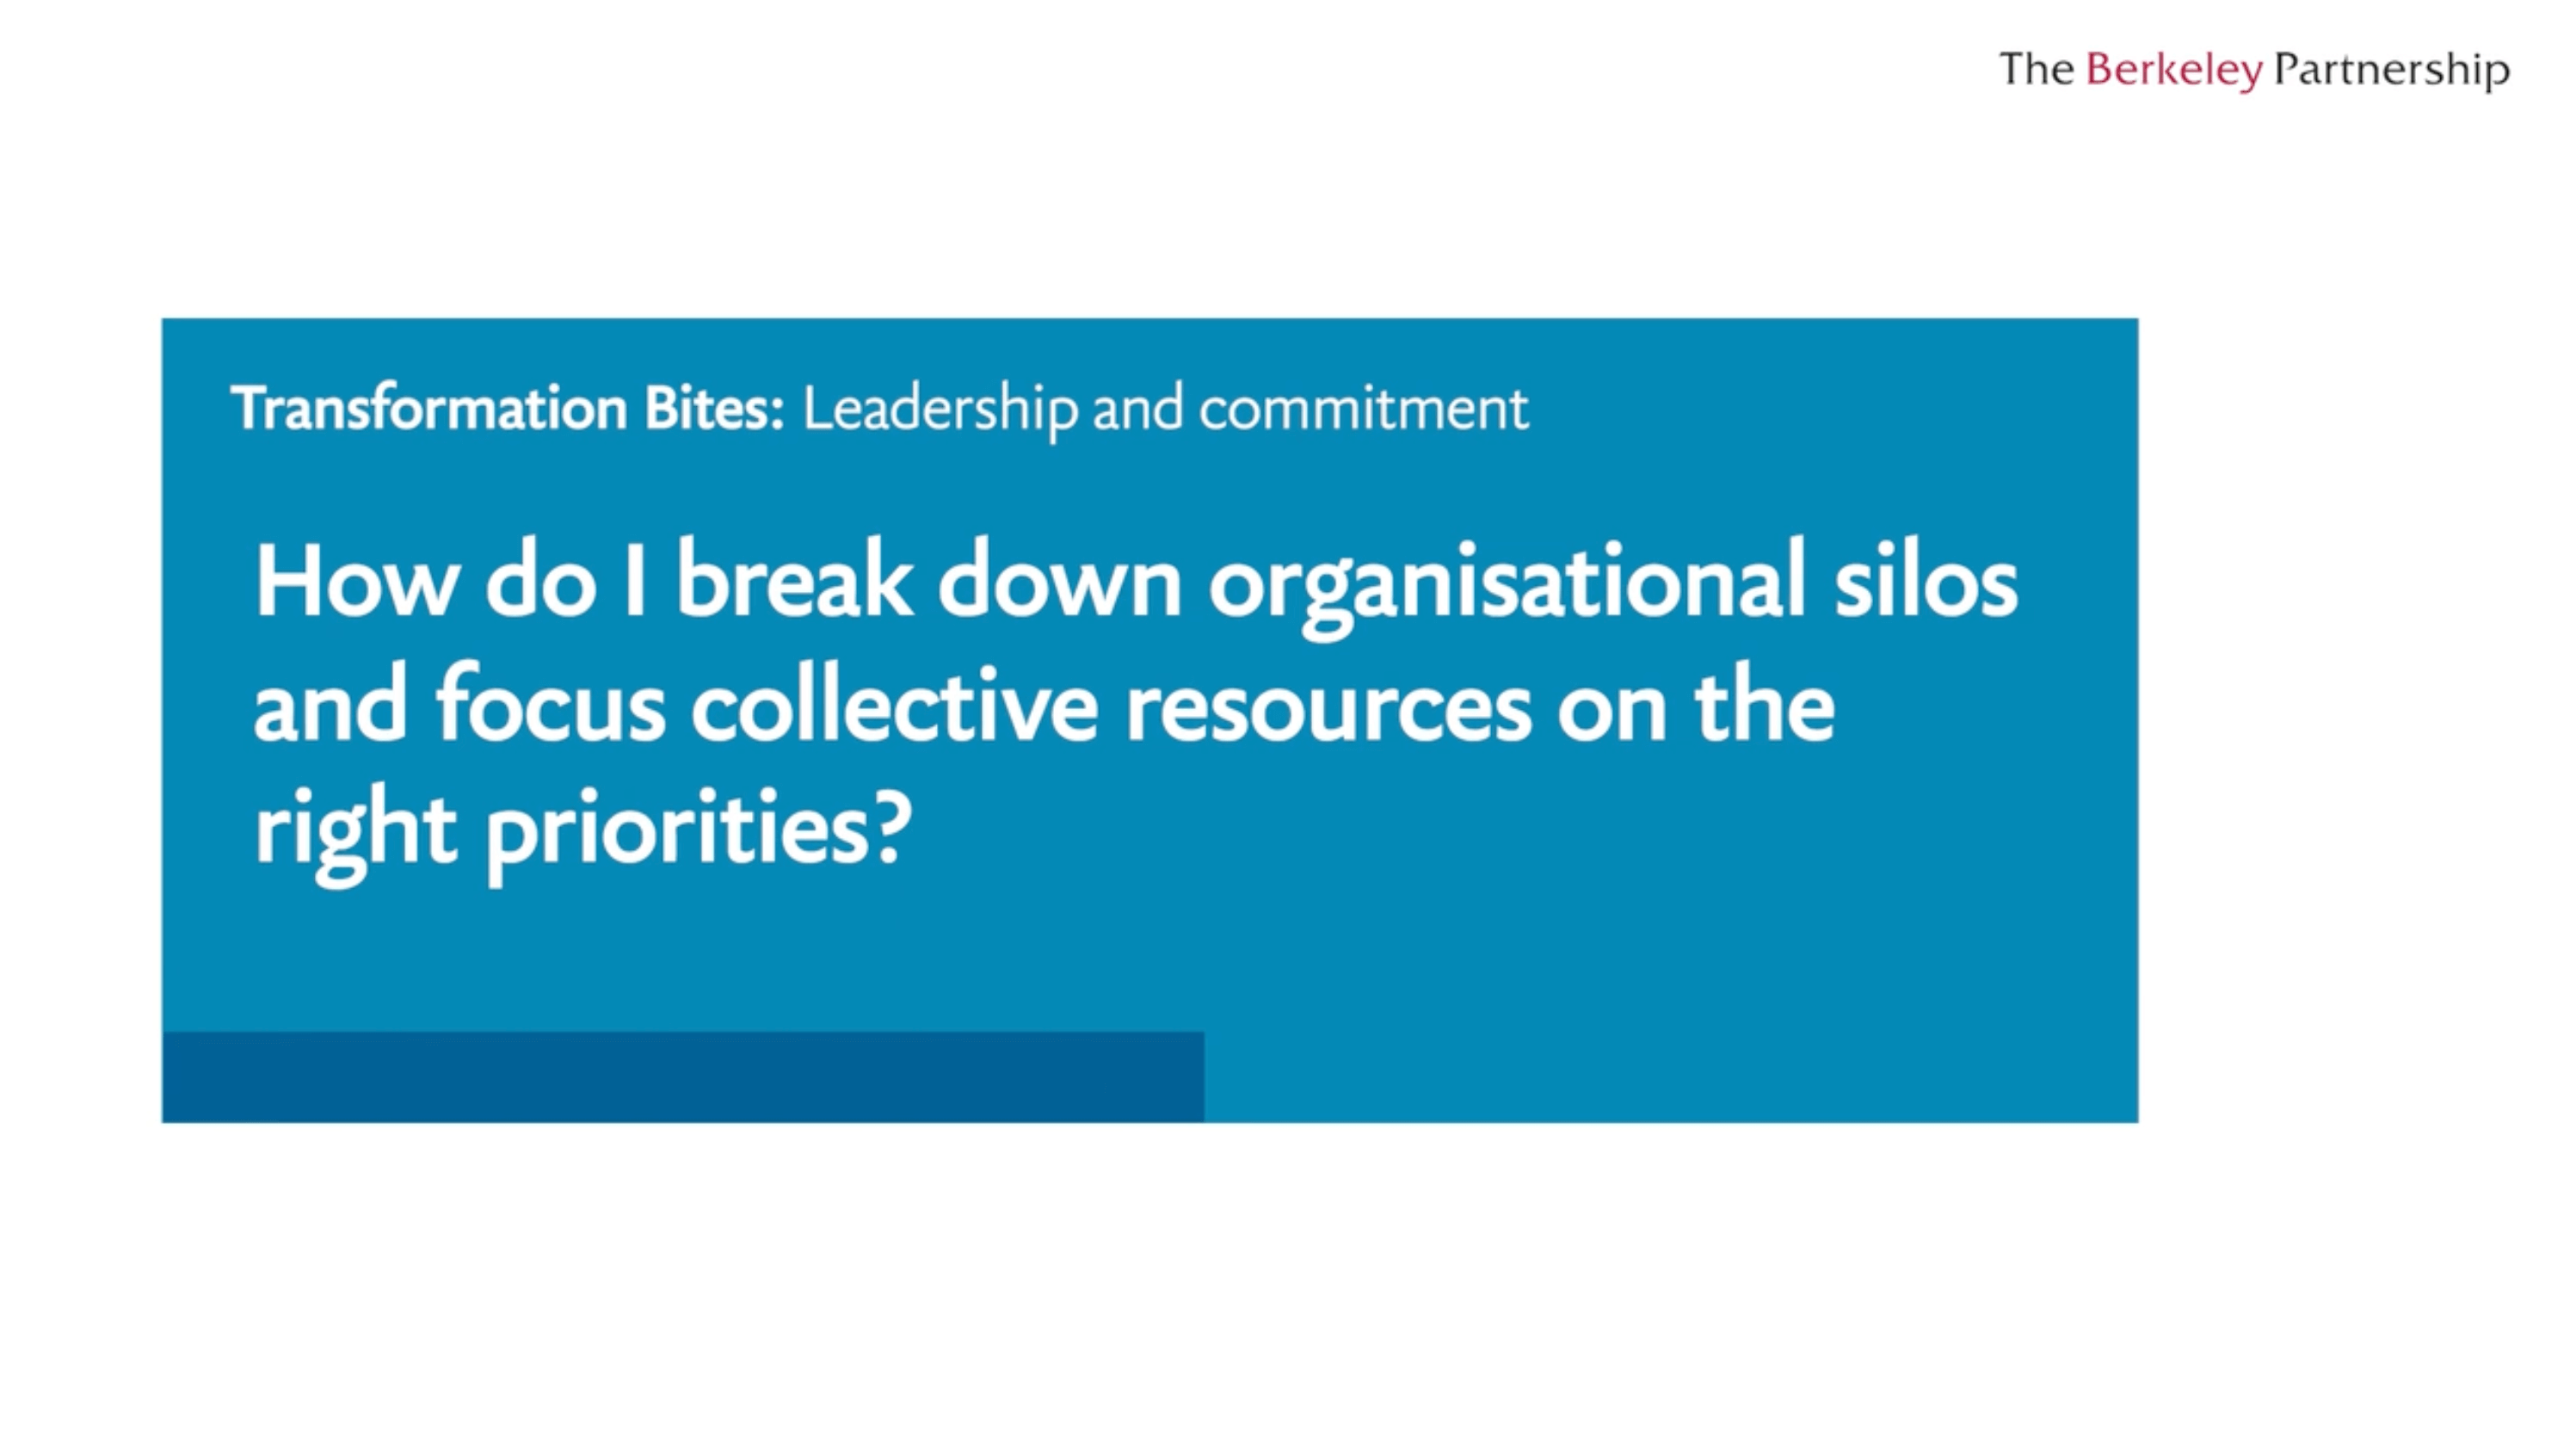 How do I break down organisational silos and focus collective resources on the right priorities?